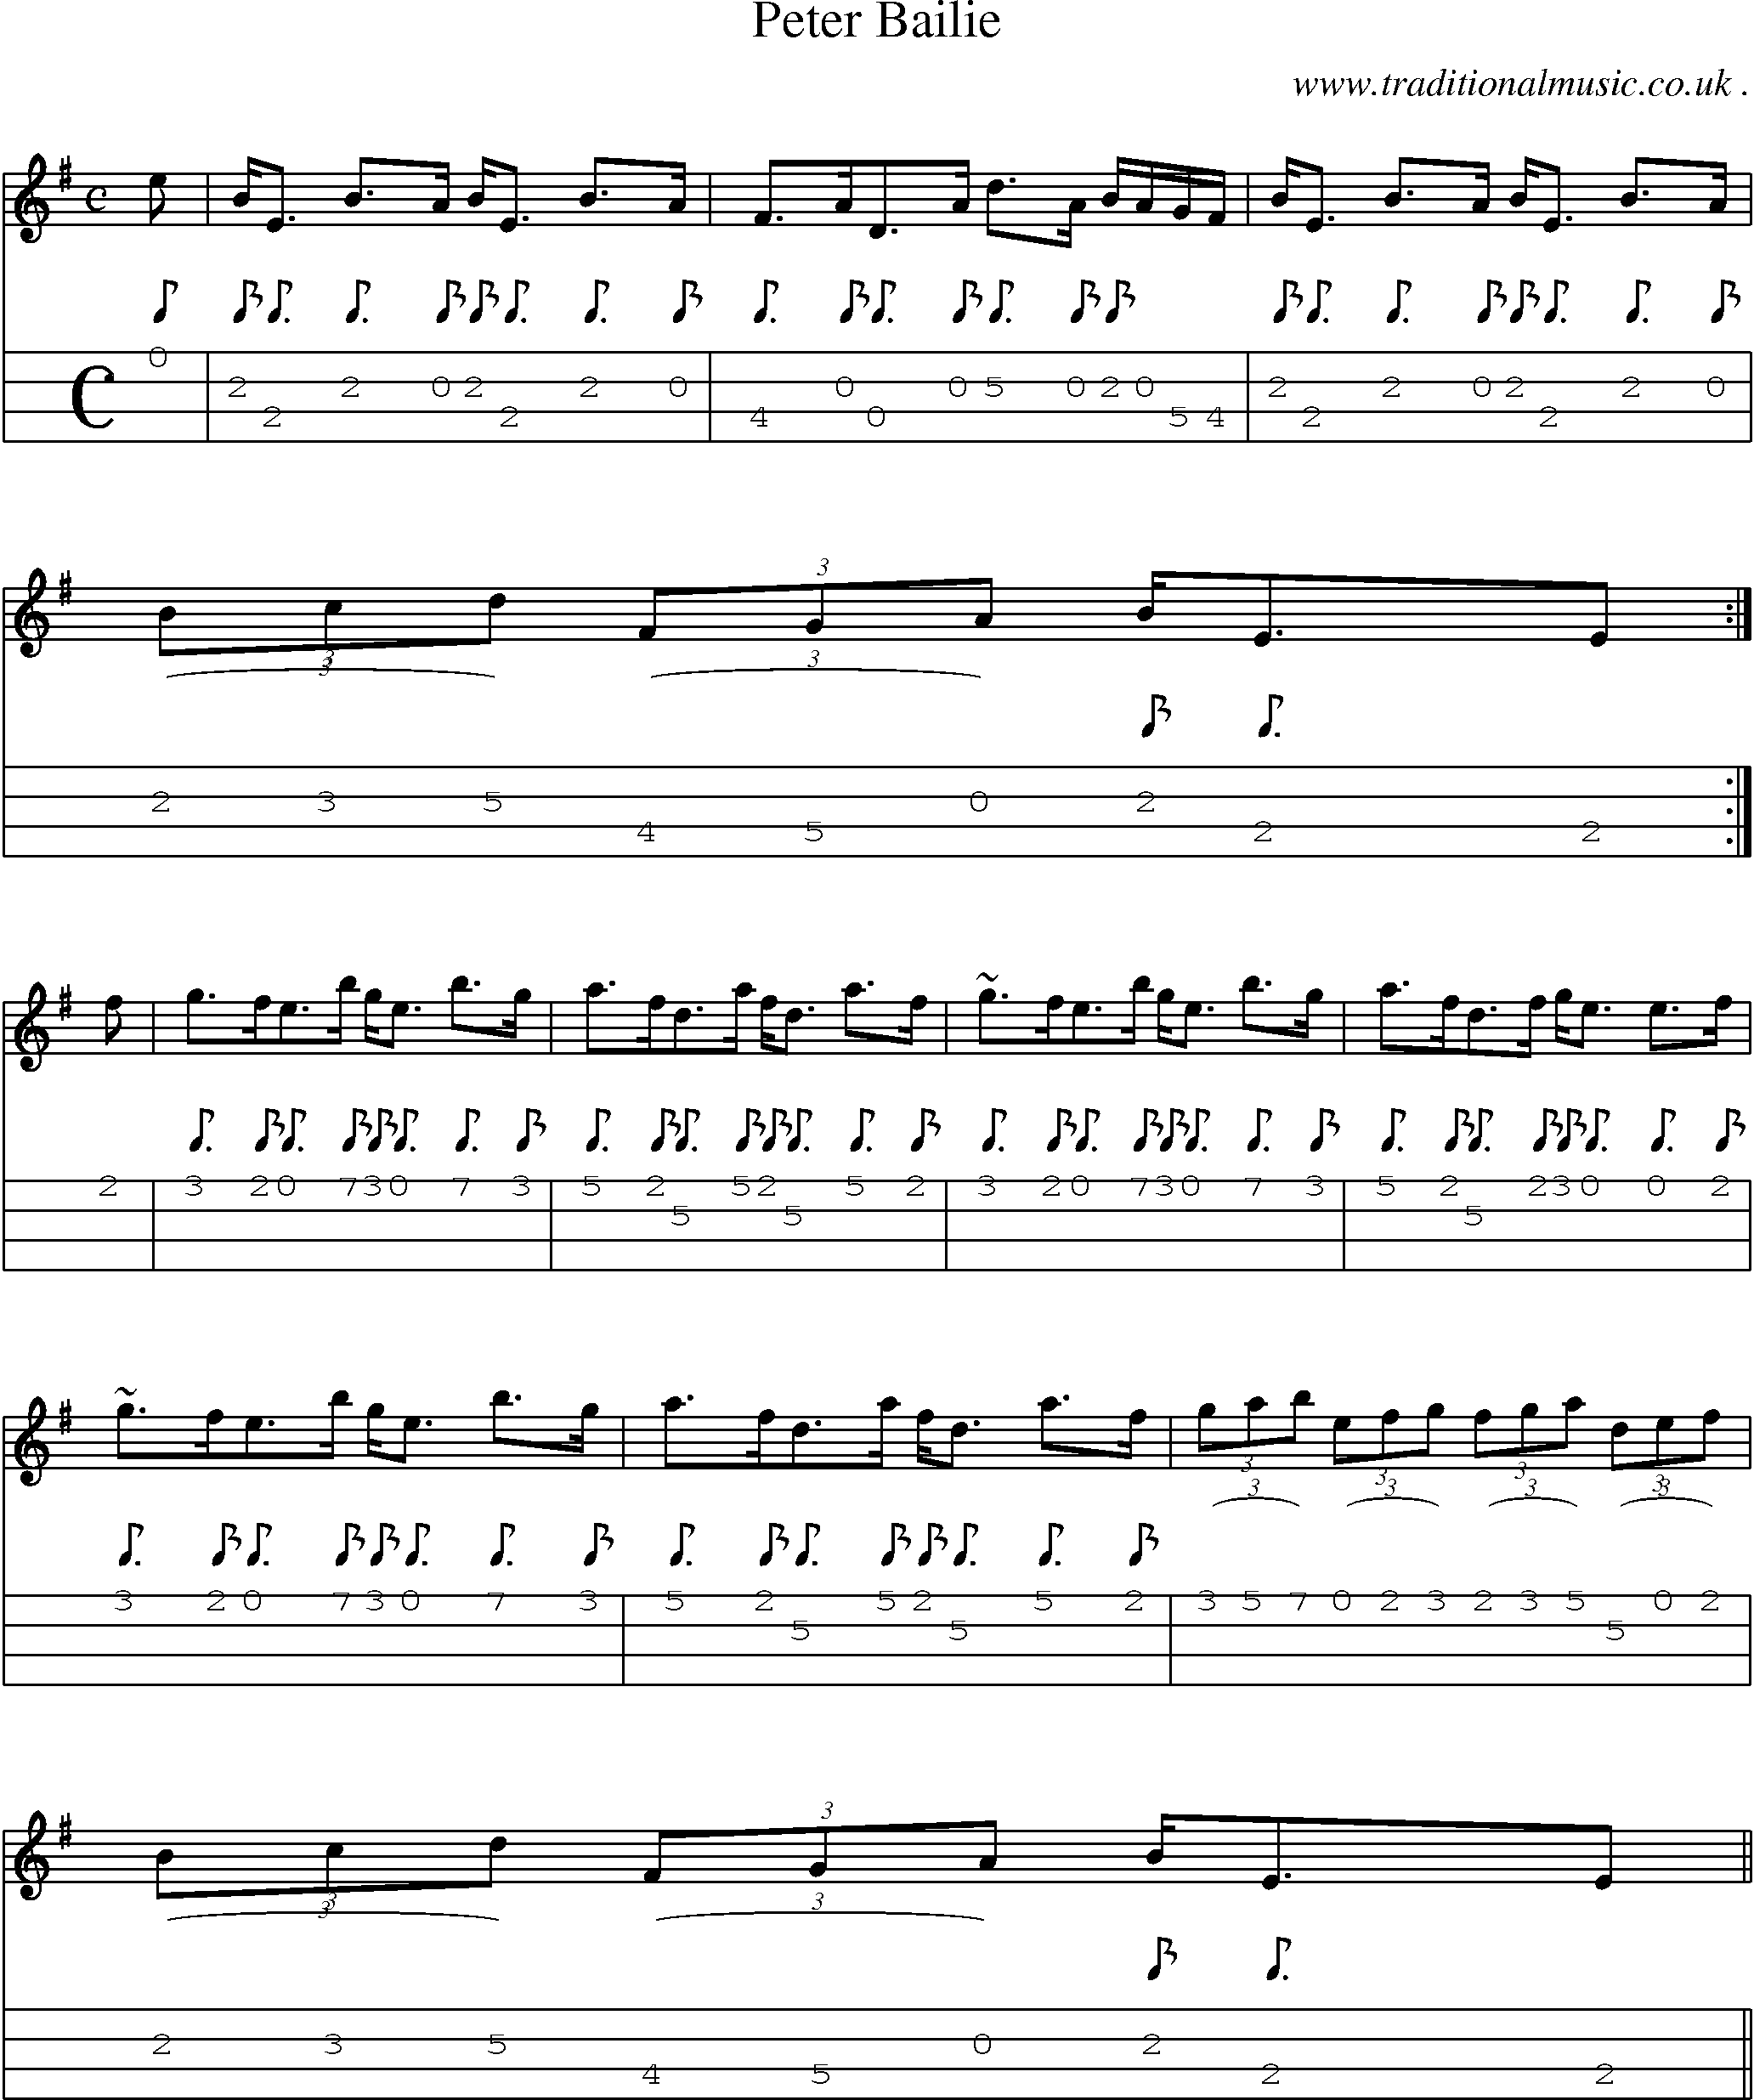 Sheet-music  score, Chords and Mandolin Tabs for Peter Bailie